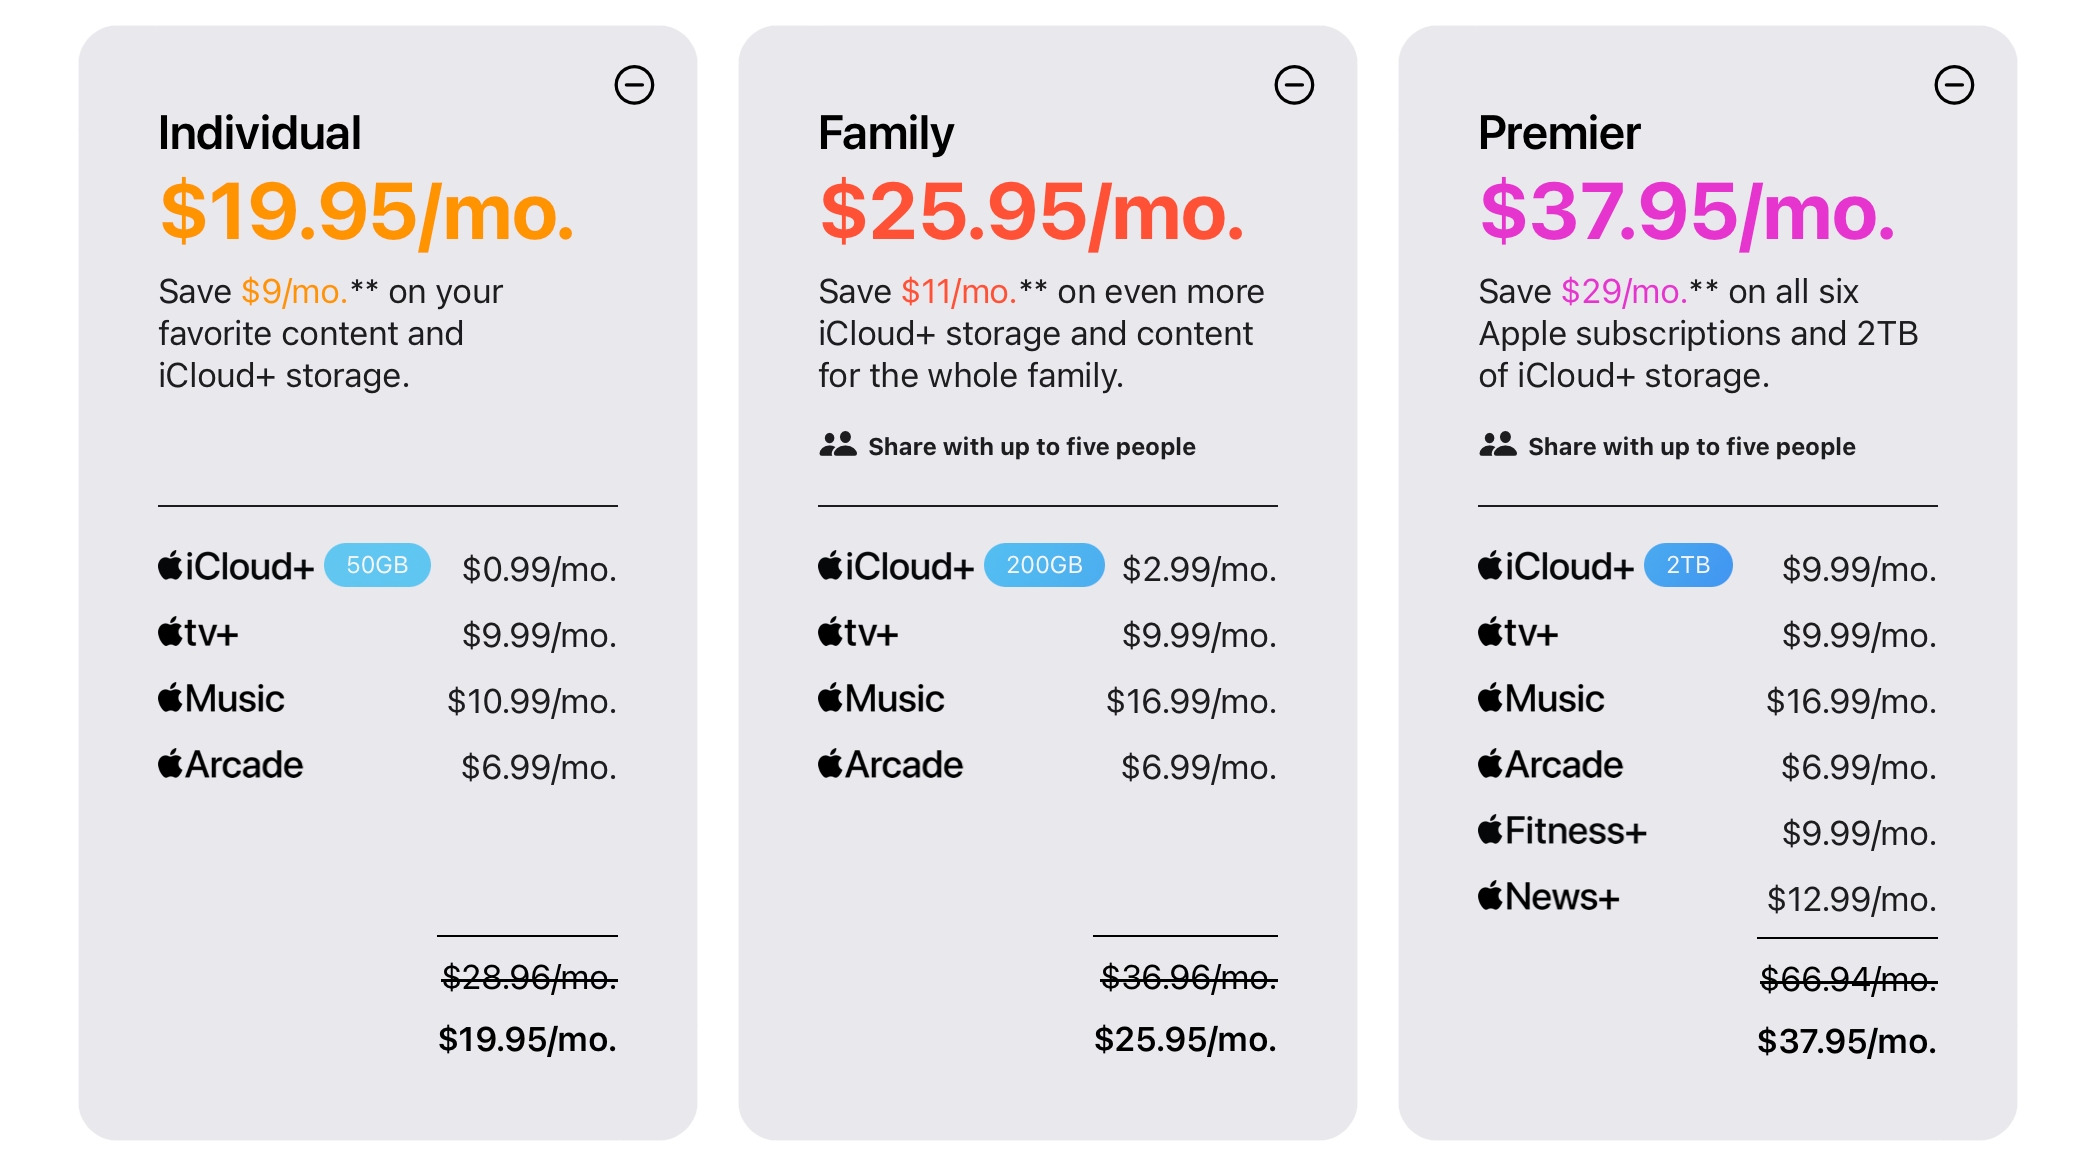 The Apple One bundle plans and pricing.